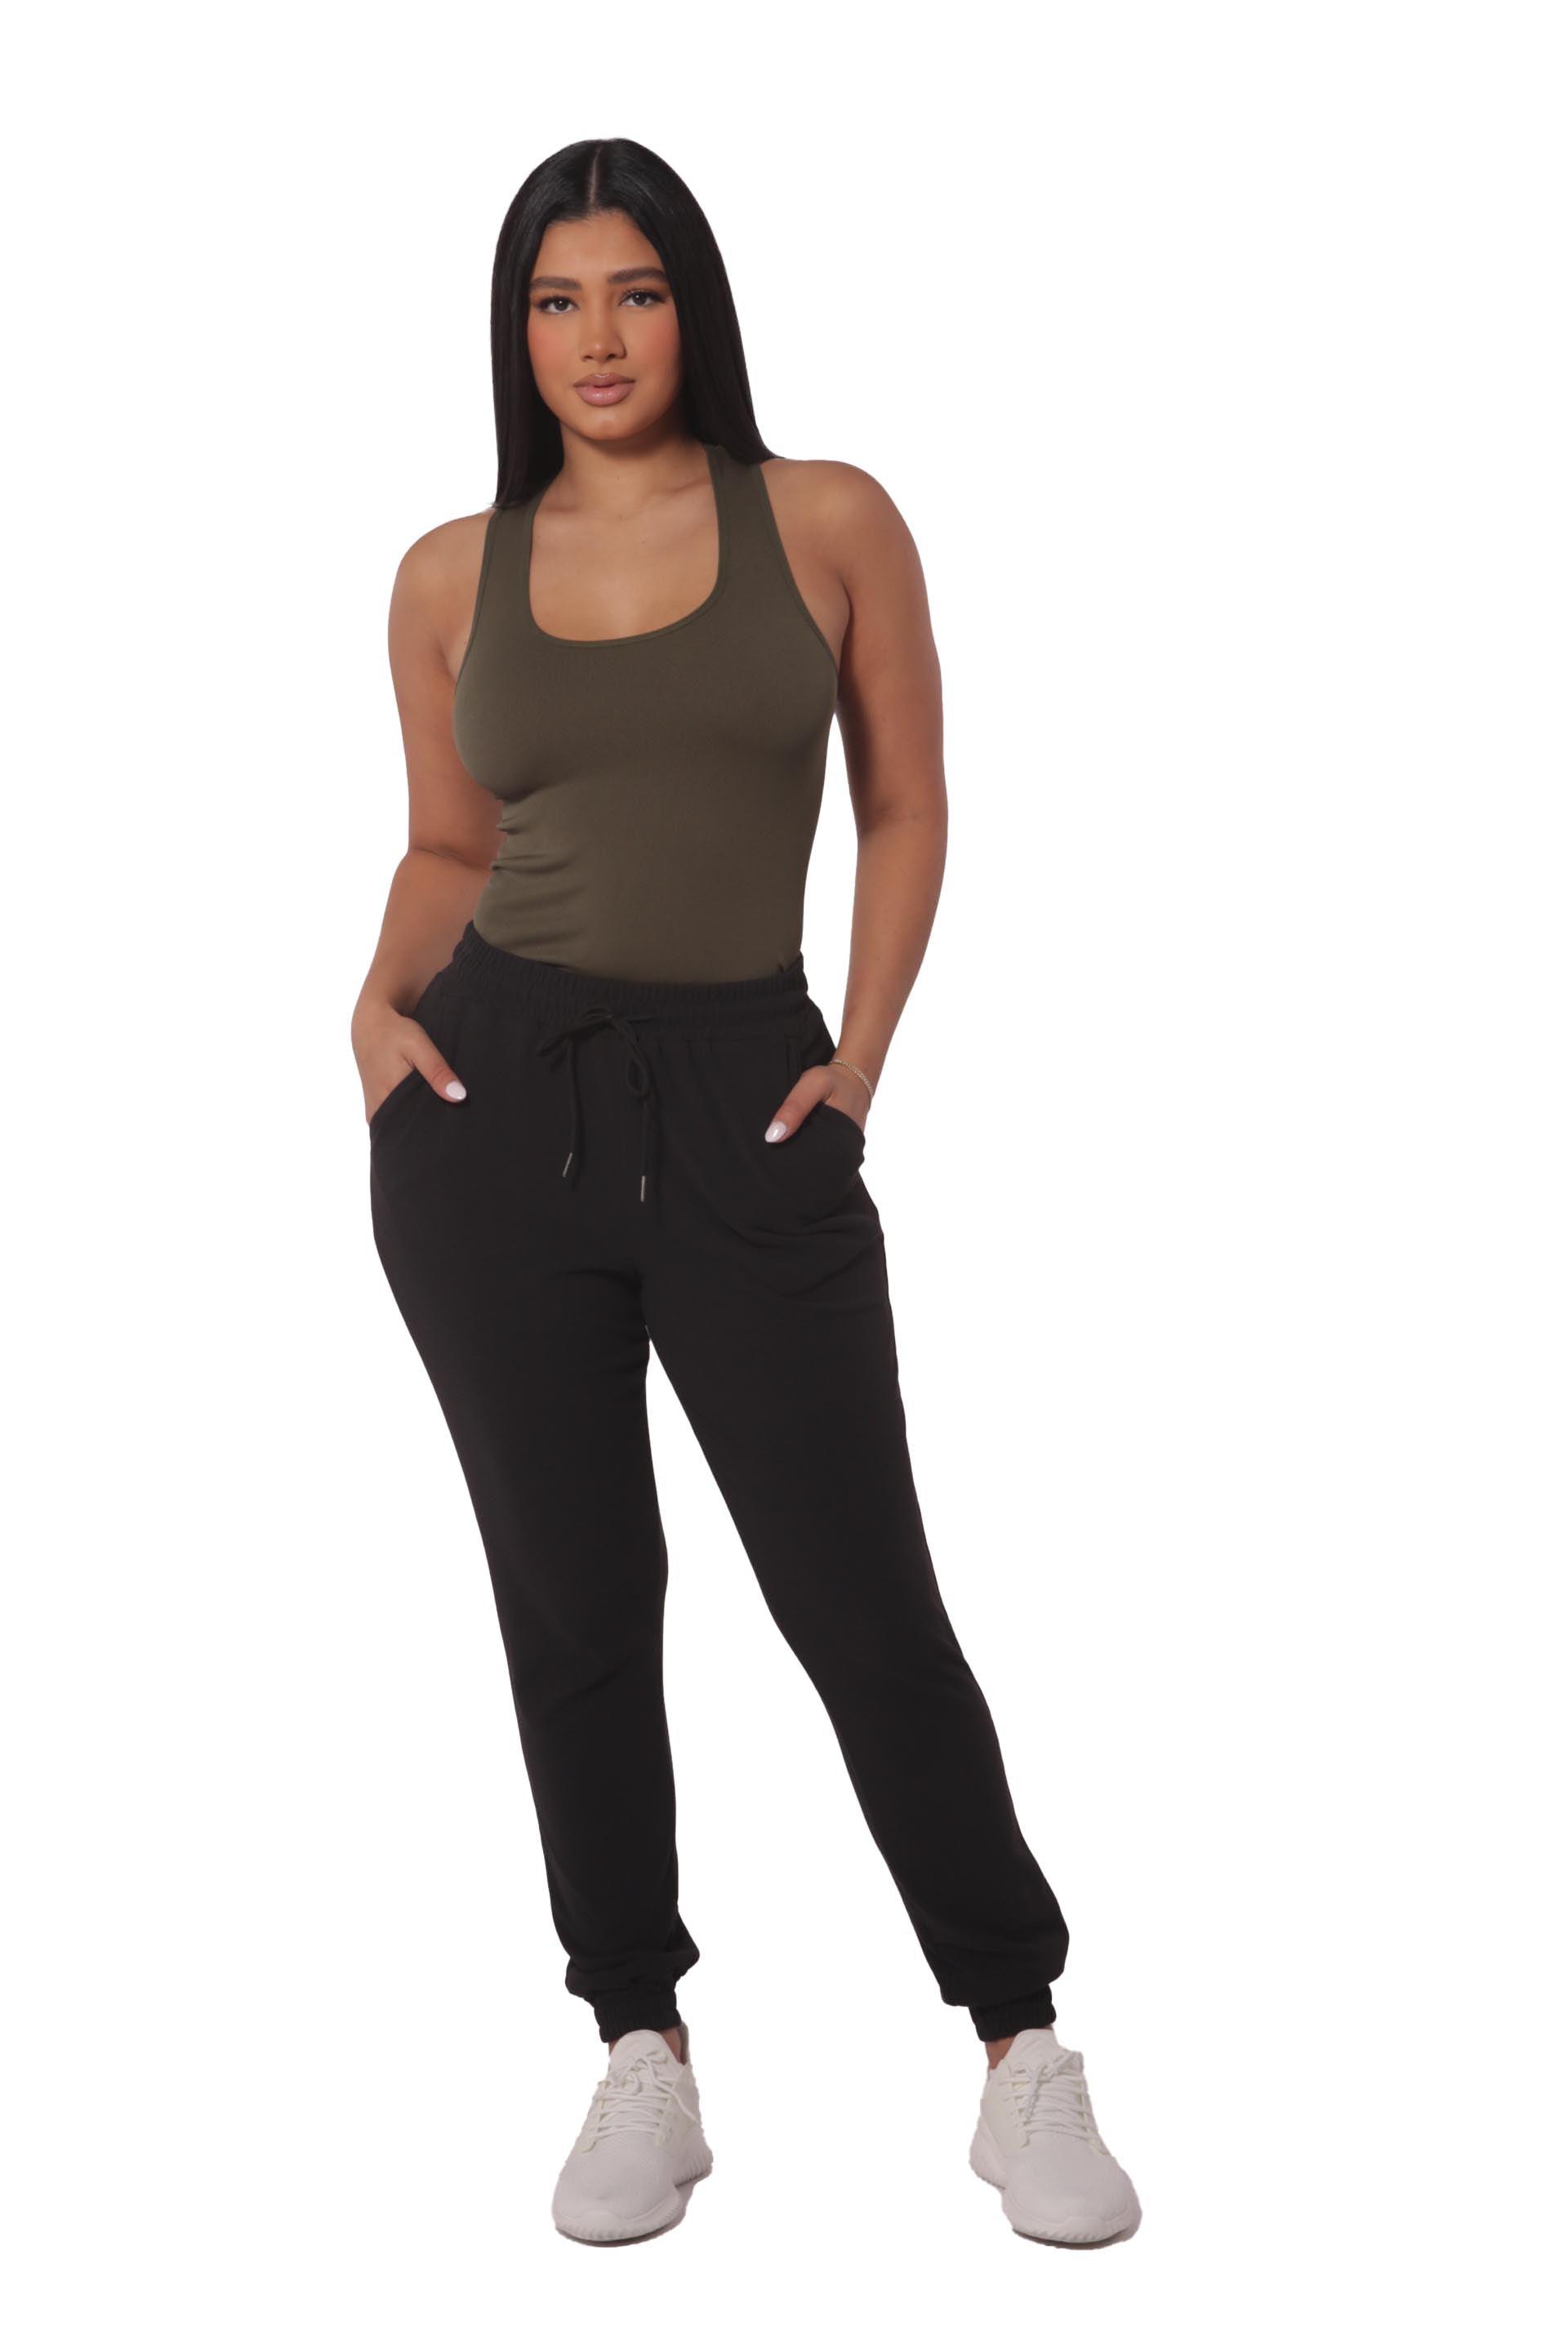 Soft Brushed Fleece Lined Jogger Sweatpants With Front Tie - Heather Black - SHOSHO Fashion